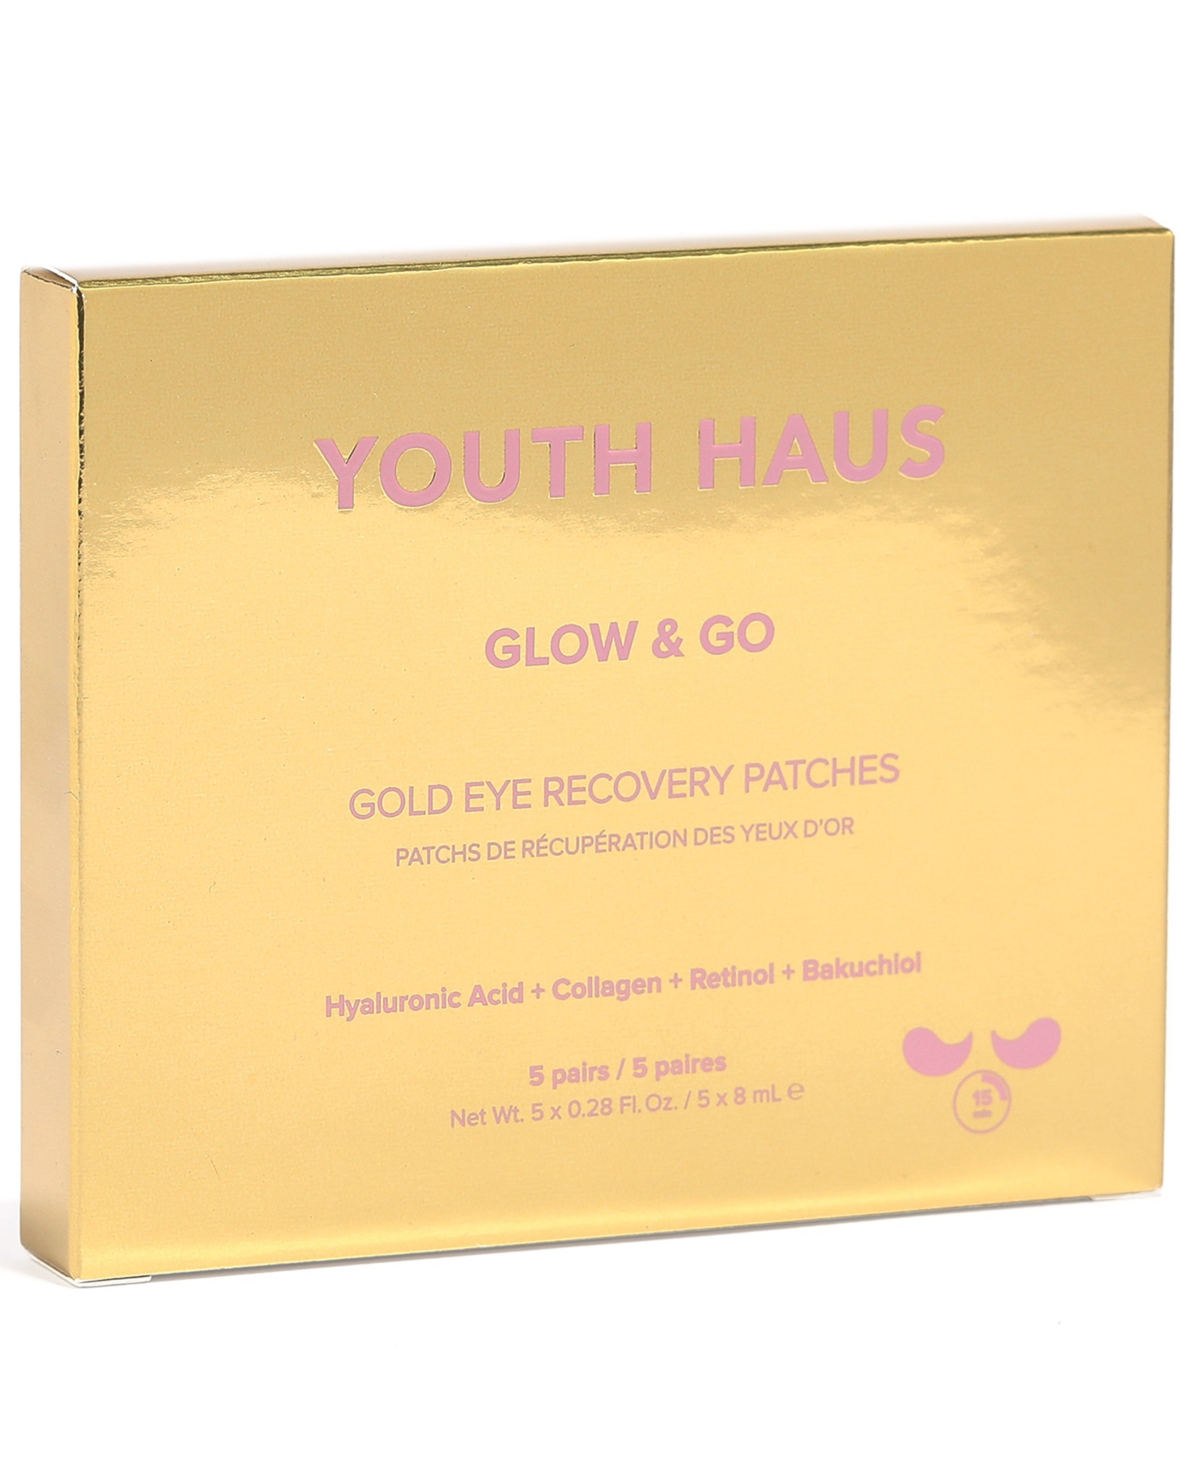 Youth Haus Glow & Go Gold Eye Recovery Patches, 5-Pk.